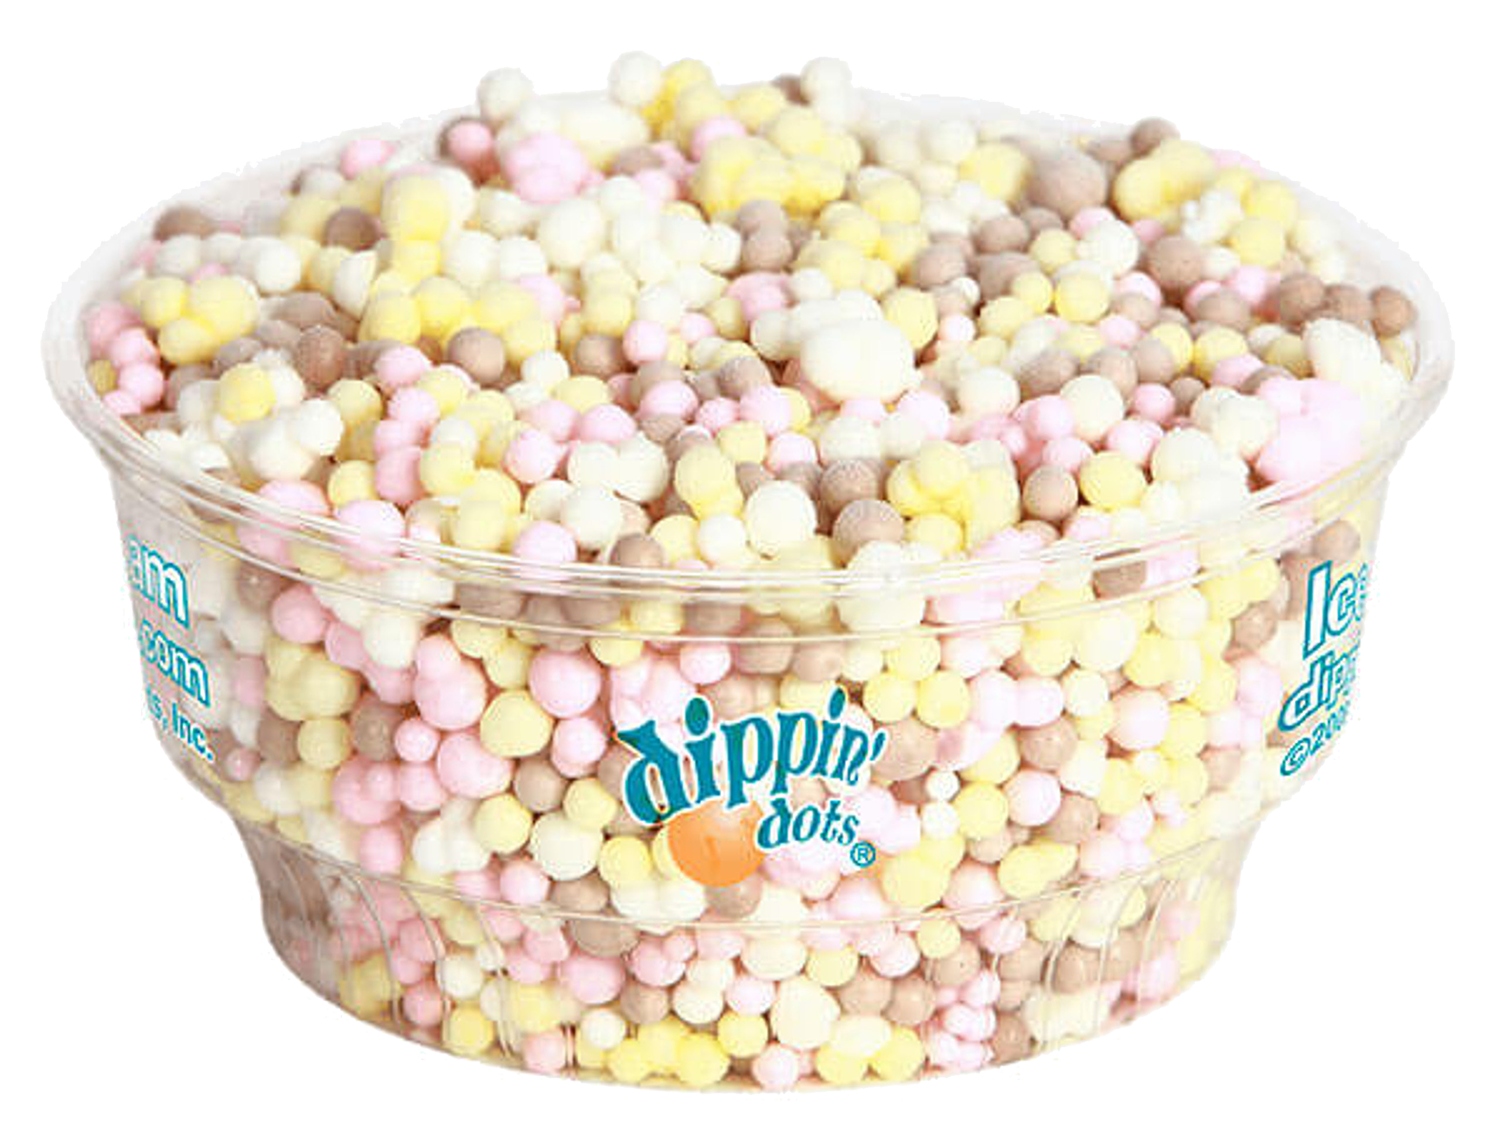 Welcome to Mi Dippin' Dots